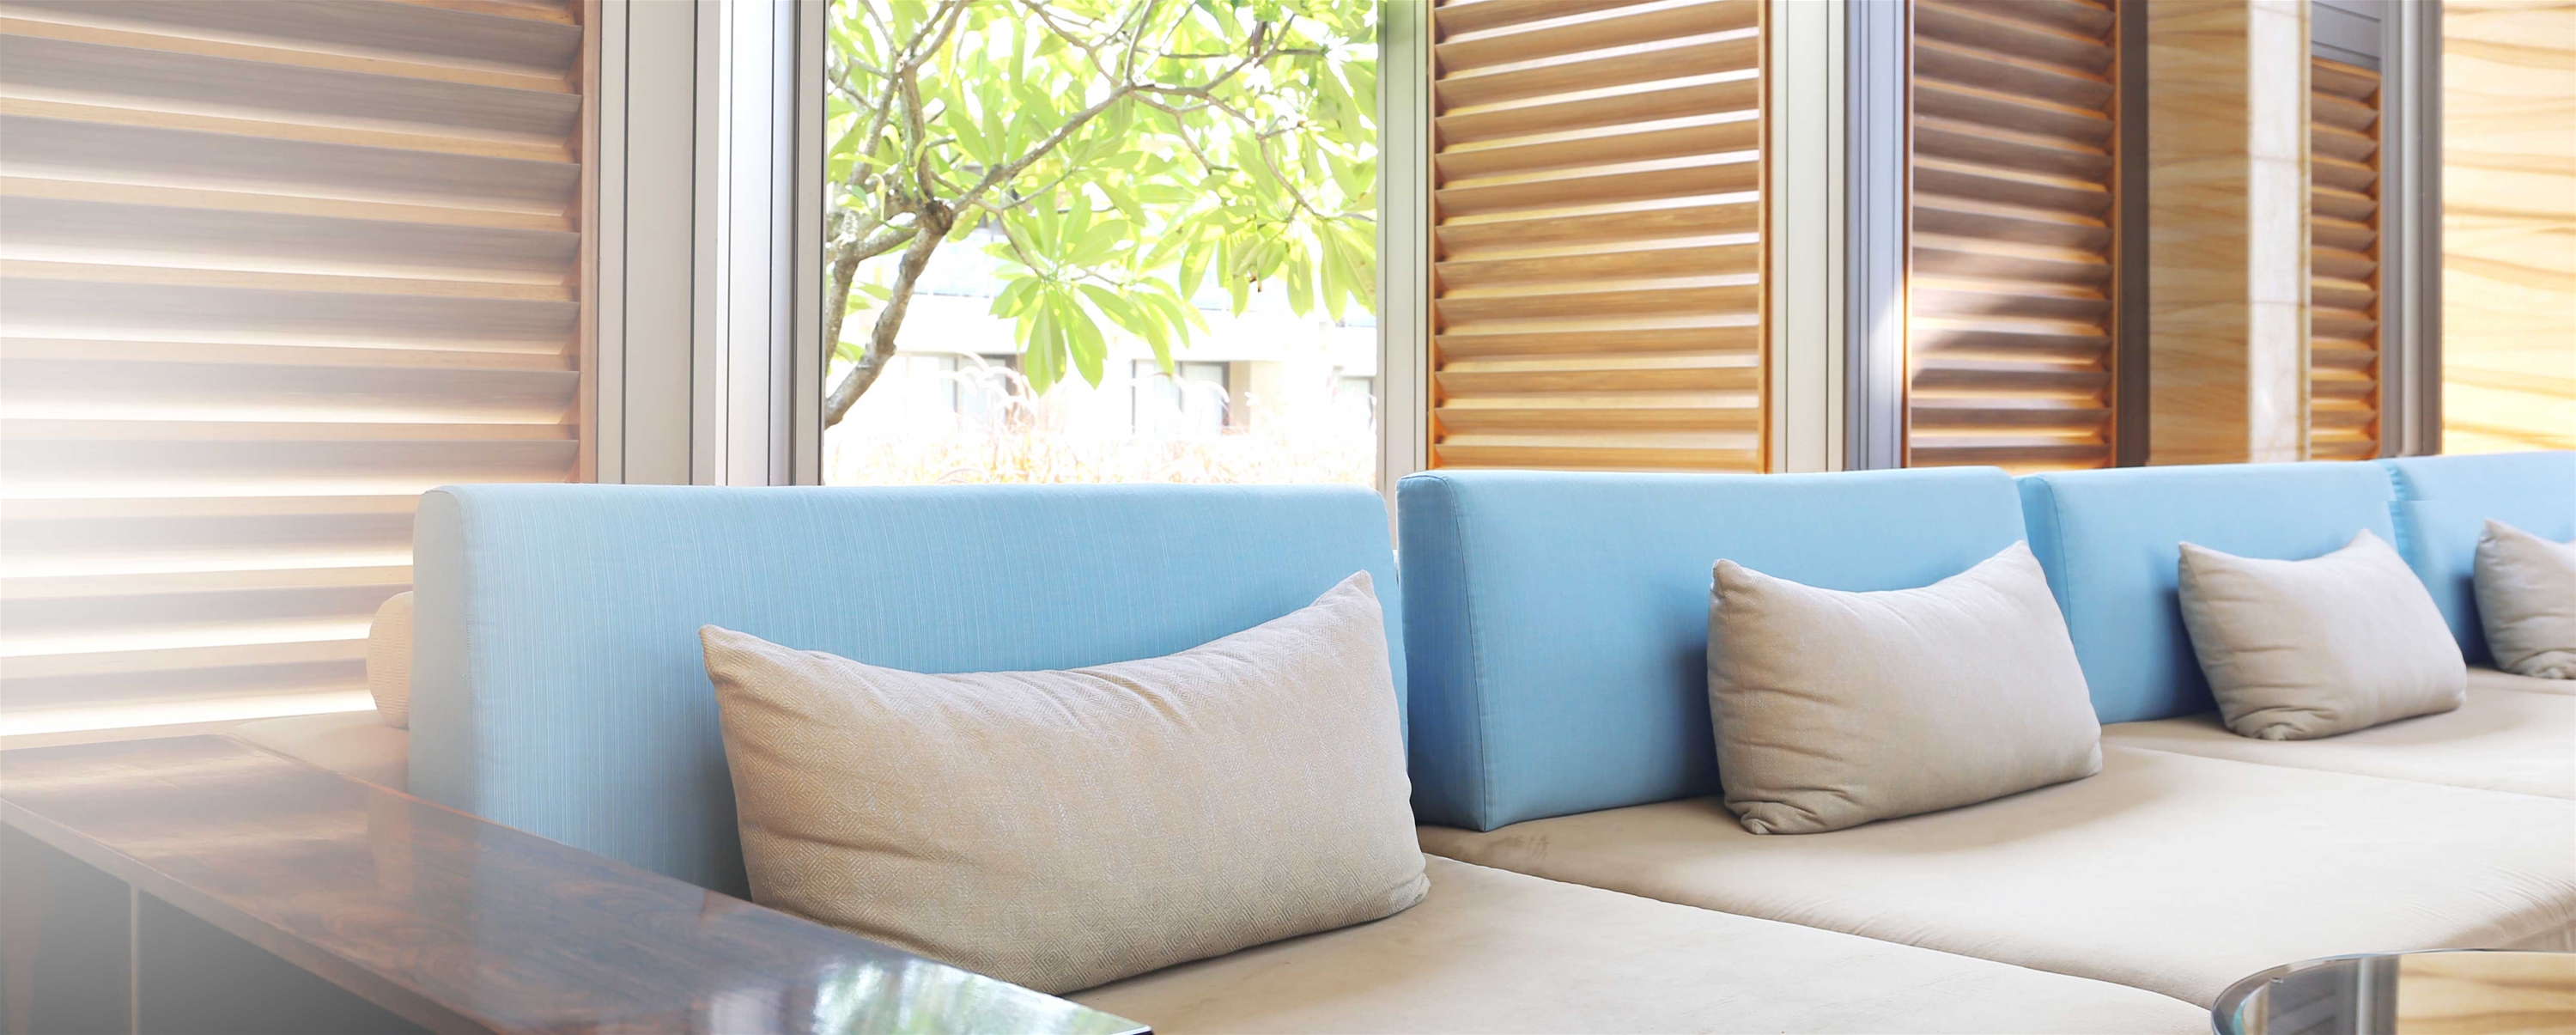 Motorized Blinds and Shutters Altadena